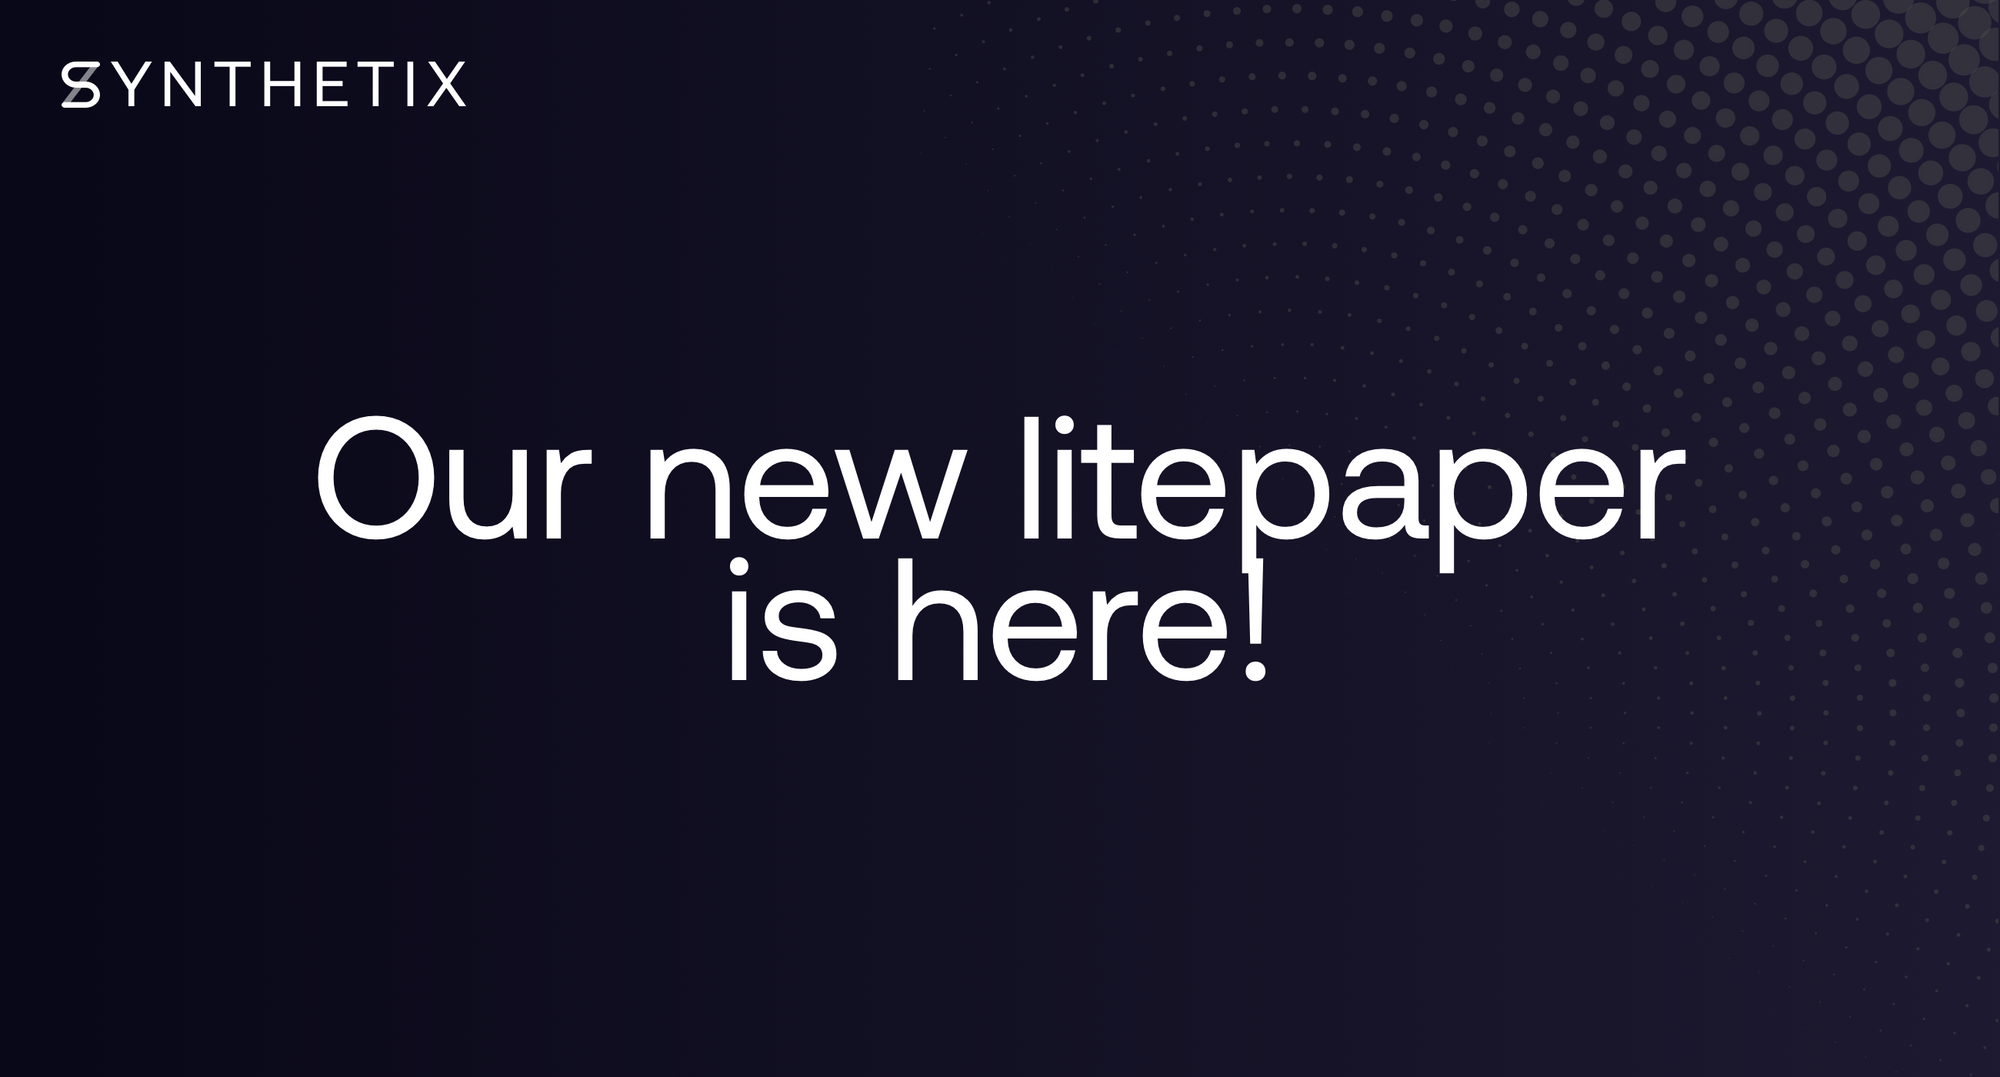 Check out the new Synthetix litepaper!